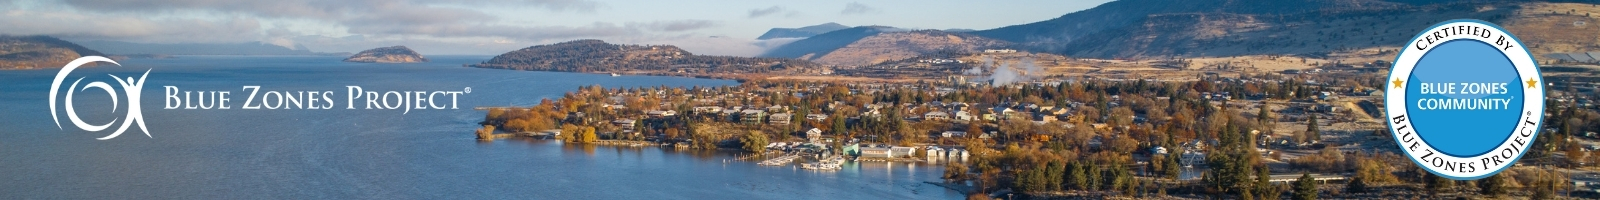 Aerial View of Klamath Falls with Blue Zones Project Logo